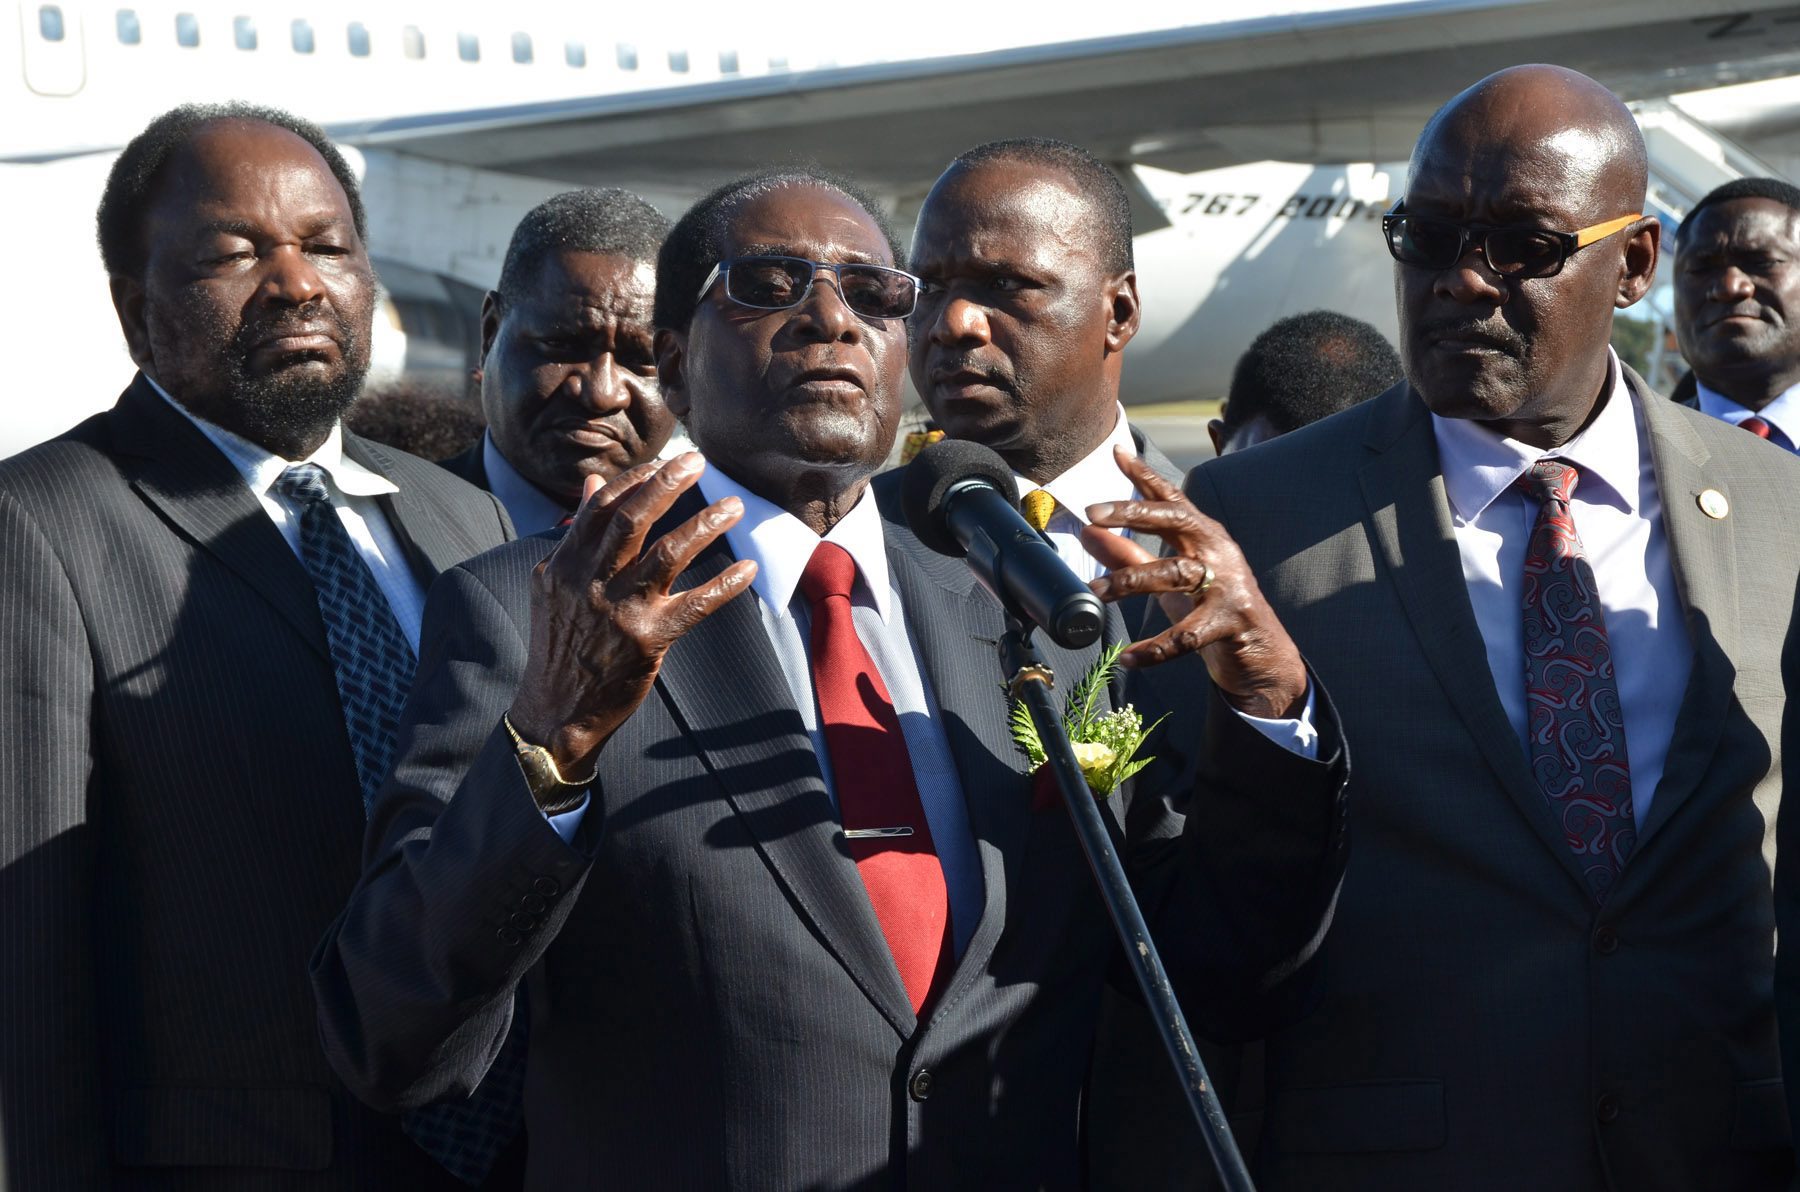 2016-11-29 00:00:00 epa05652327 Zimbabwe's President Robert Mugabe makes a statement upon his arrival to International Airport Jose Marti in Havana, Cuba, 29 November 2016. Robert Mugabe is in Cuba to attend the funeral of late Cuban leader Fidel Castro. Castro died on 25 November age 90. EPA/Rolando Pujol